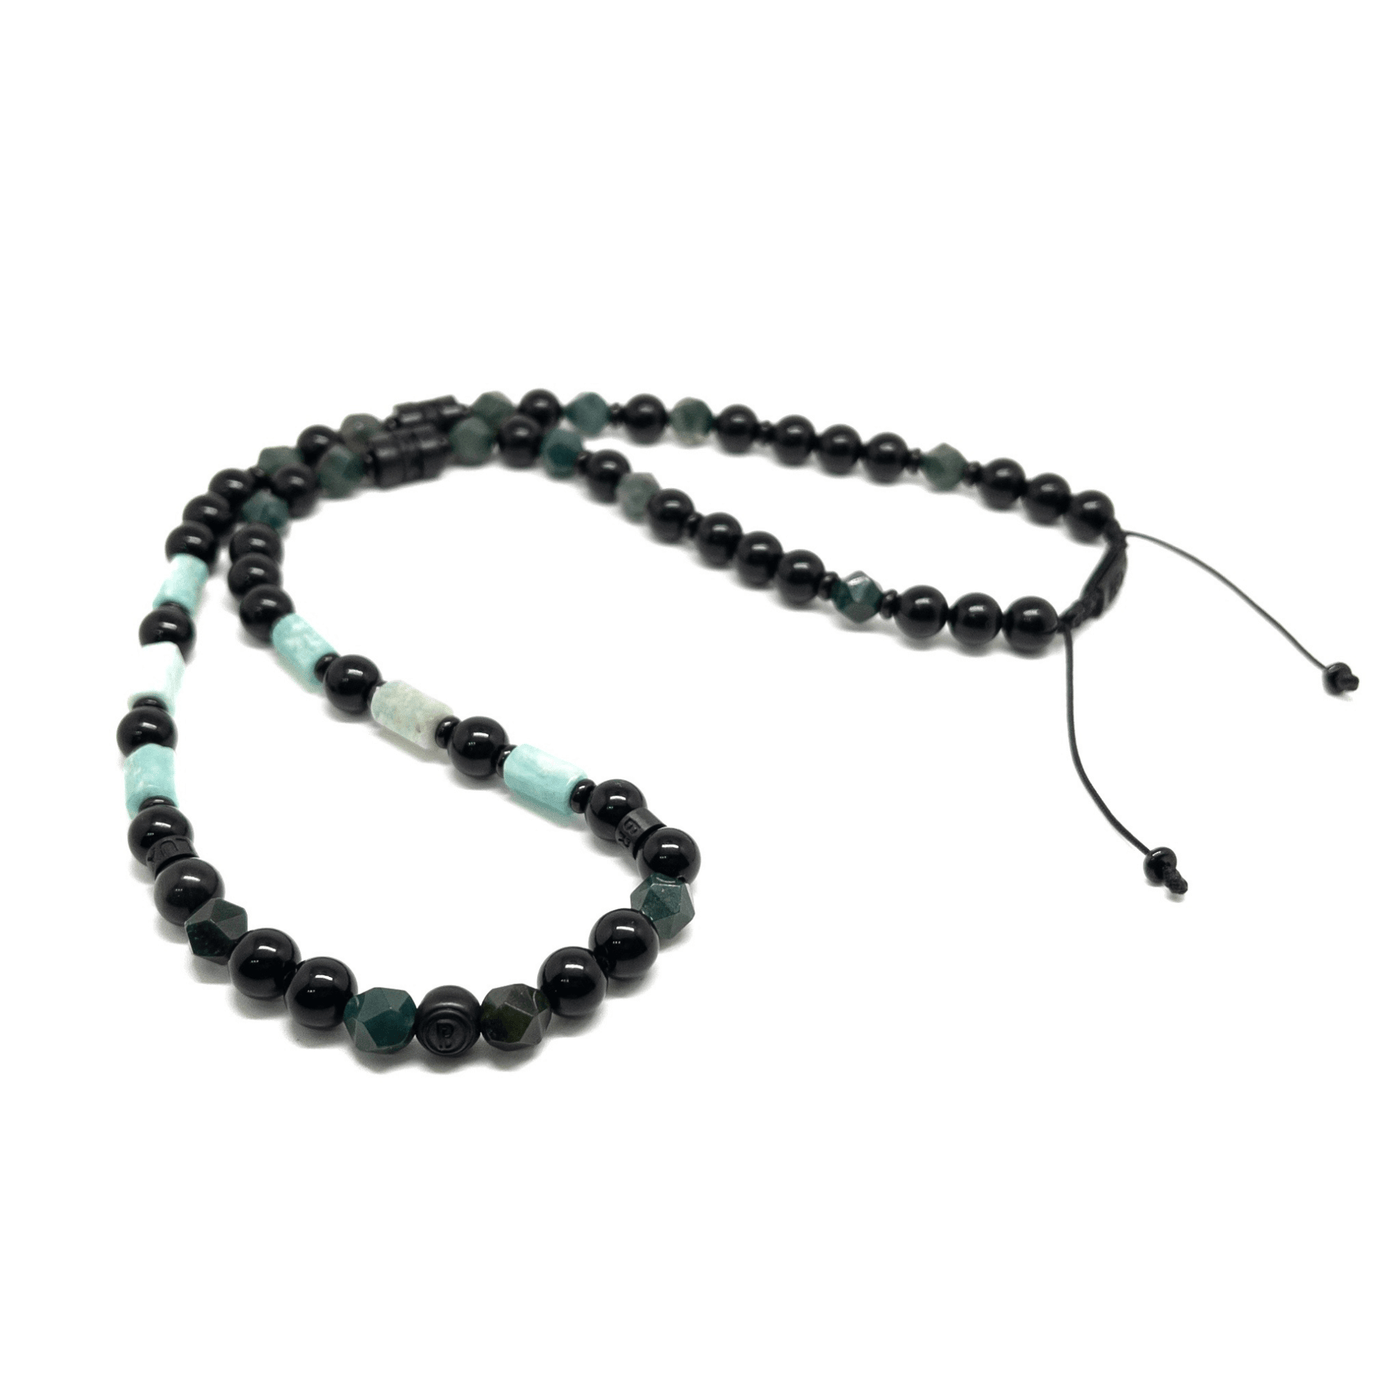 The Faceted Moss Green and Obsidian Stones Necklace